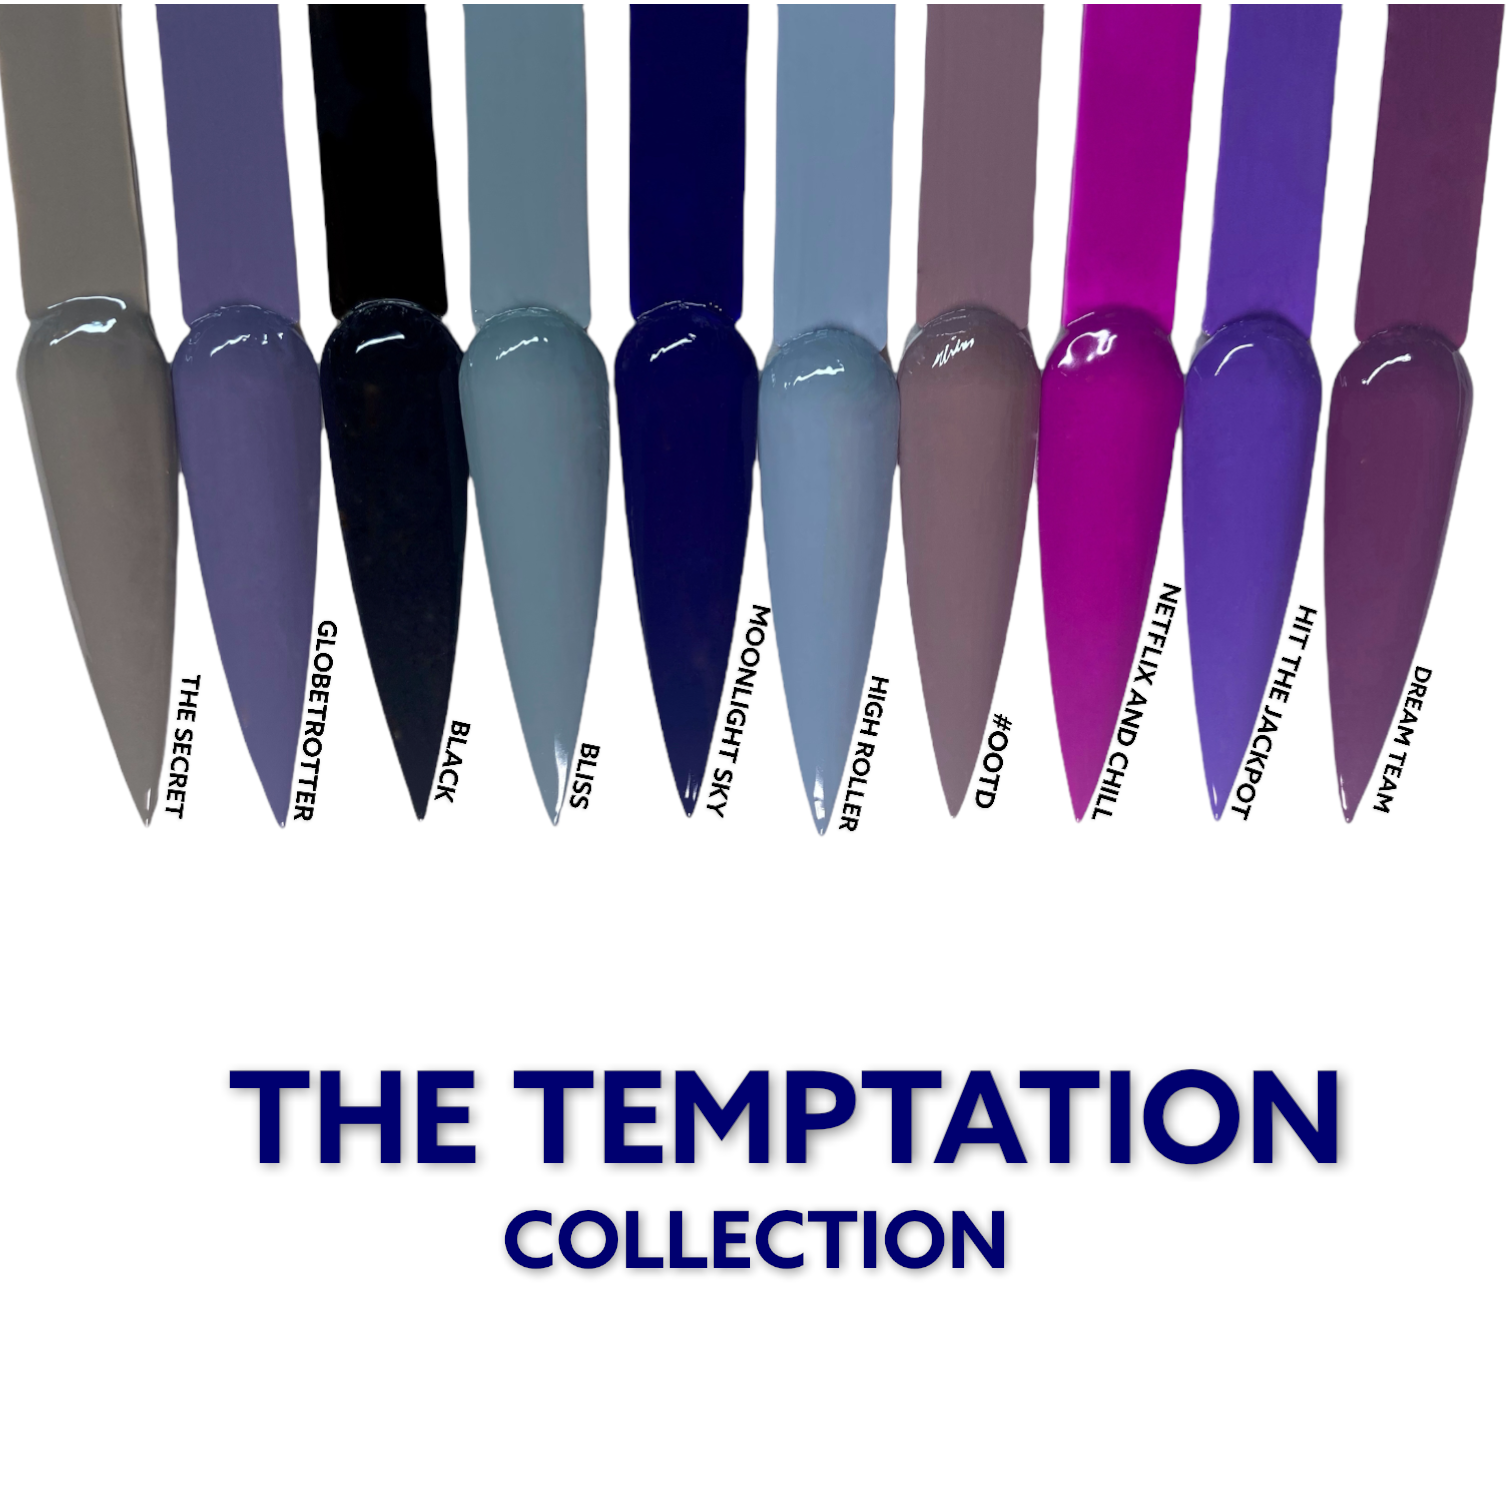 The Temptation Collection